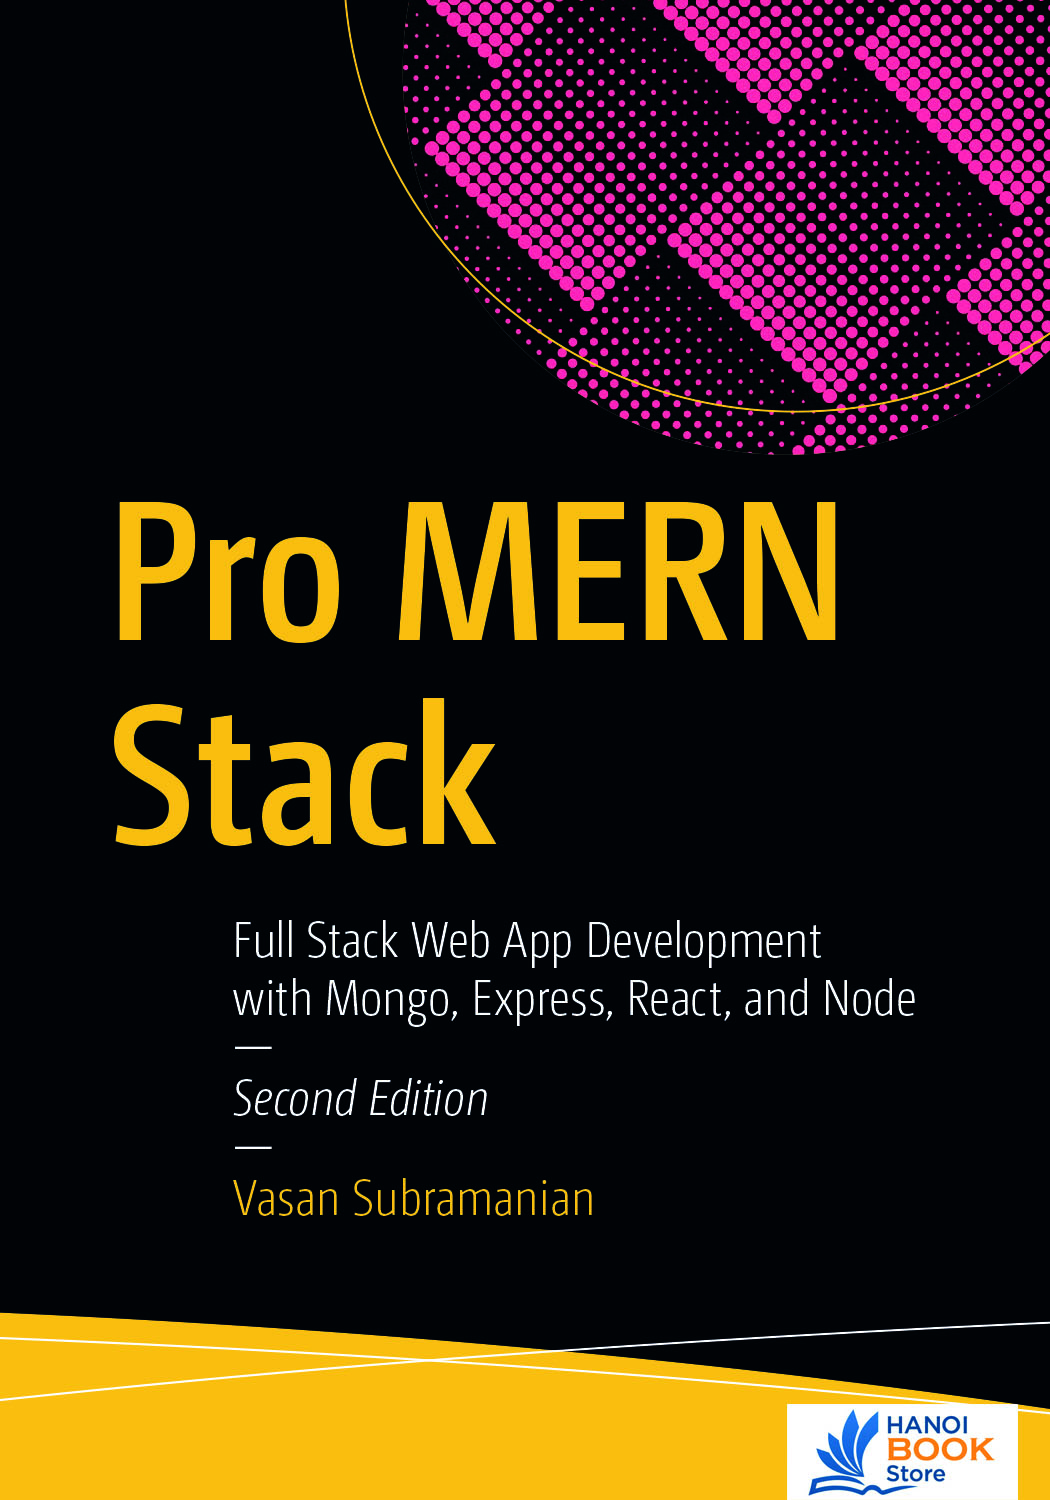 Pro MERN Stack Full Stack Web App Development with Mongo, Express, React,  and Node 